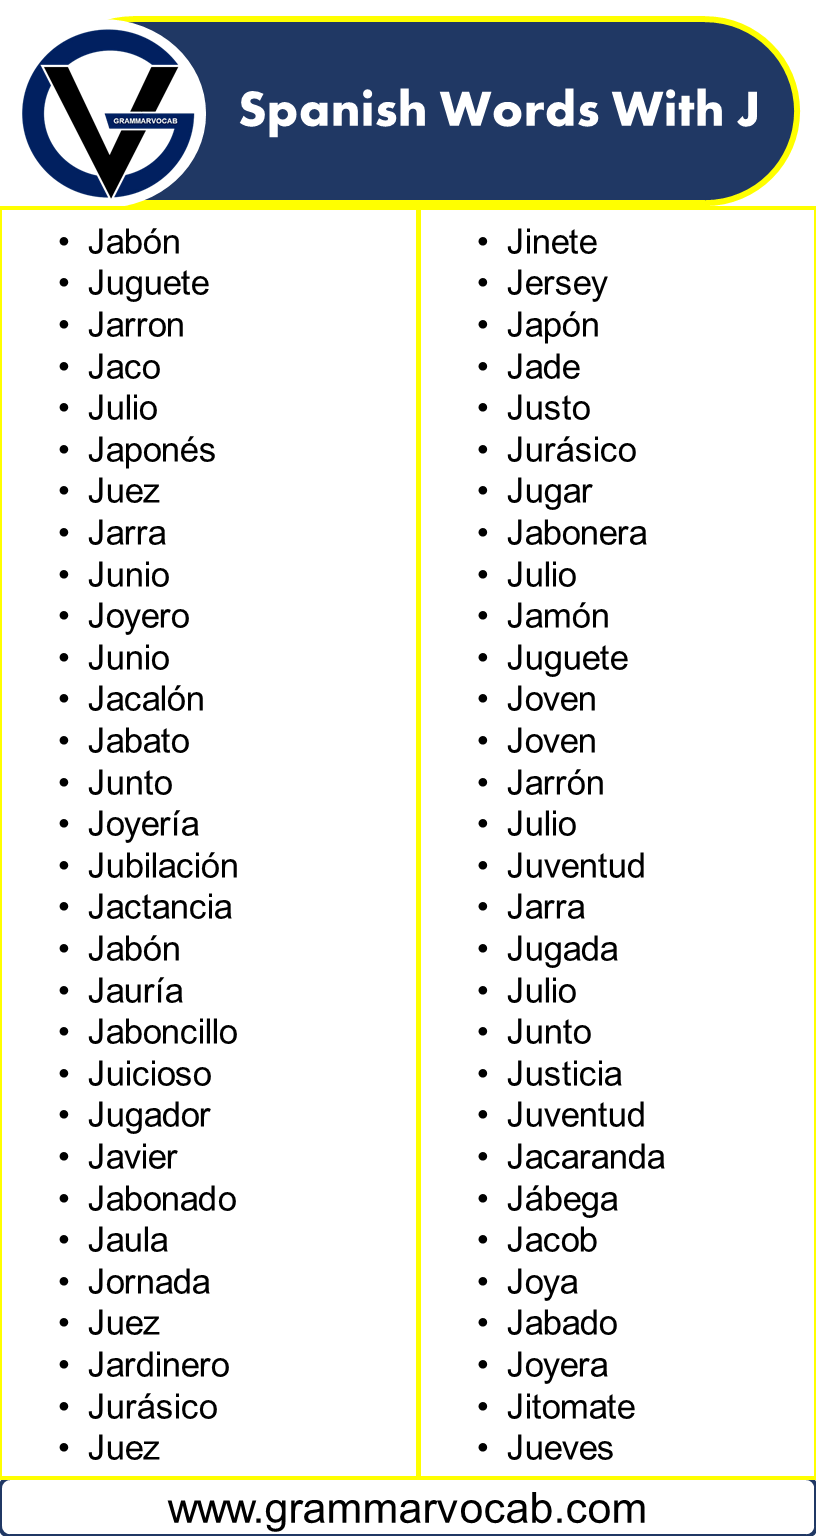 Spanish Words That Start With J